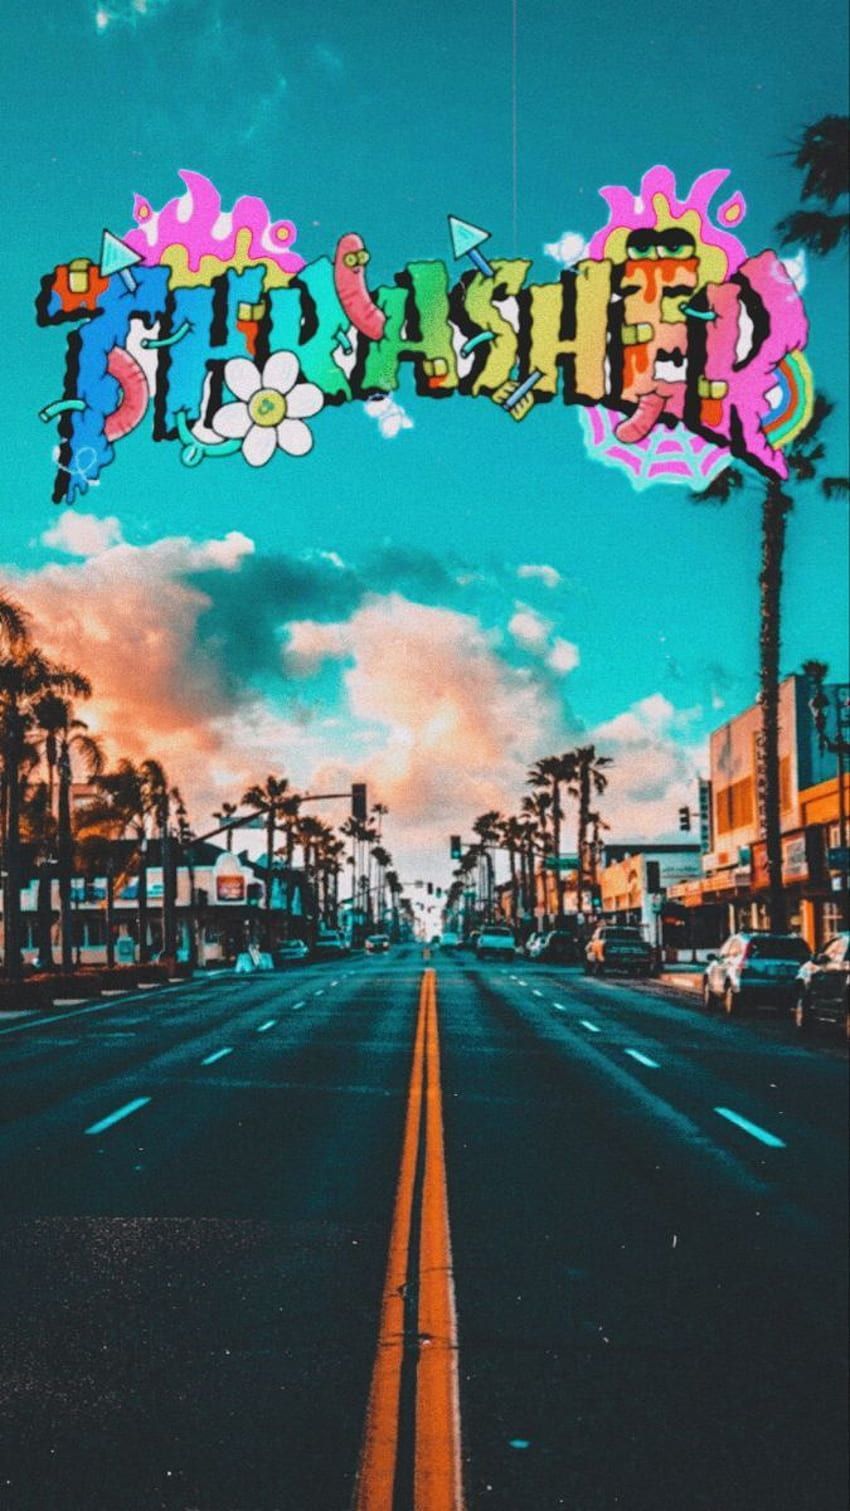 Aesthetic phone background of a street with palm trees and the word 